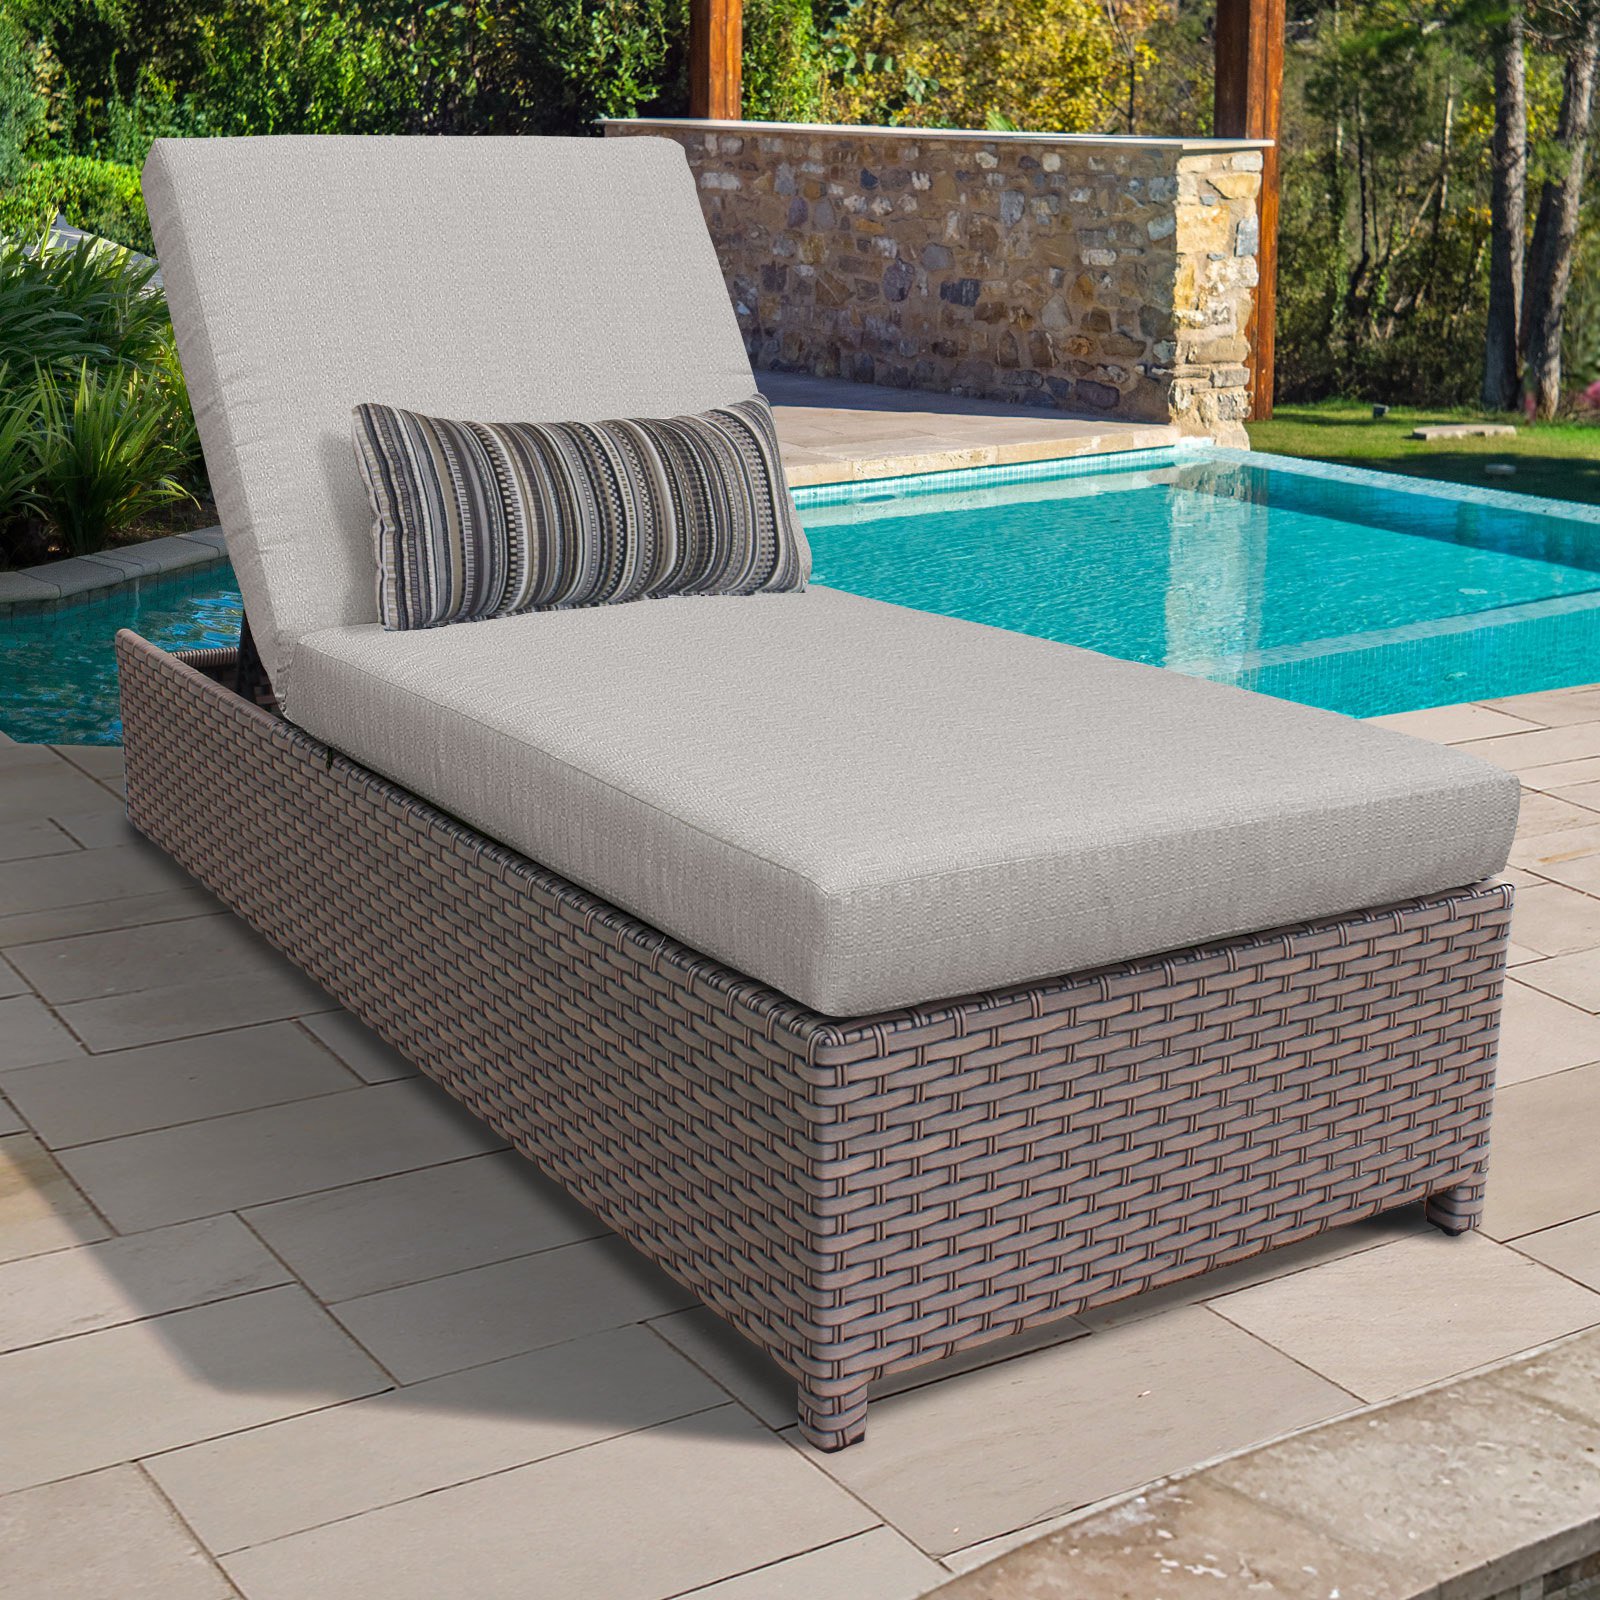 TK Classics Florence Wheeled Wicker Outdoor Chaise Lounge Chair - image 4 of 11